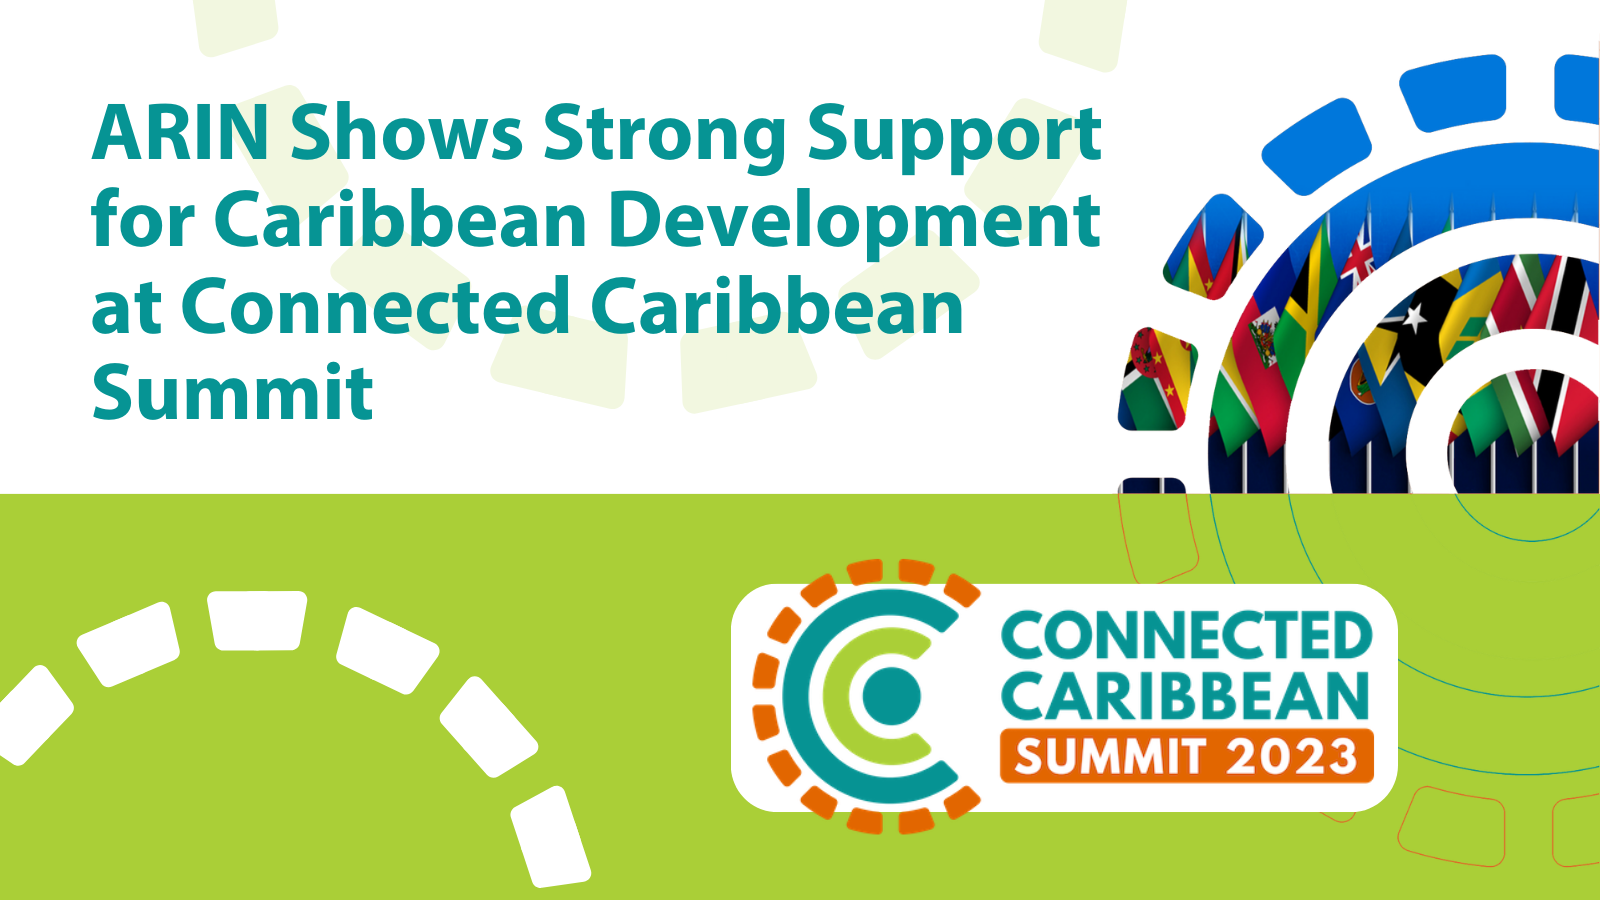 ARIN Shows Strong Support for Caribbean Development at Connected Caribbean Summit